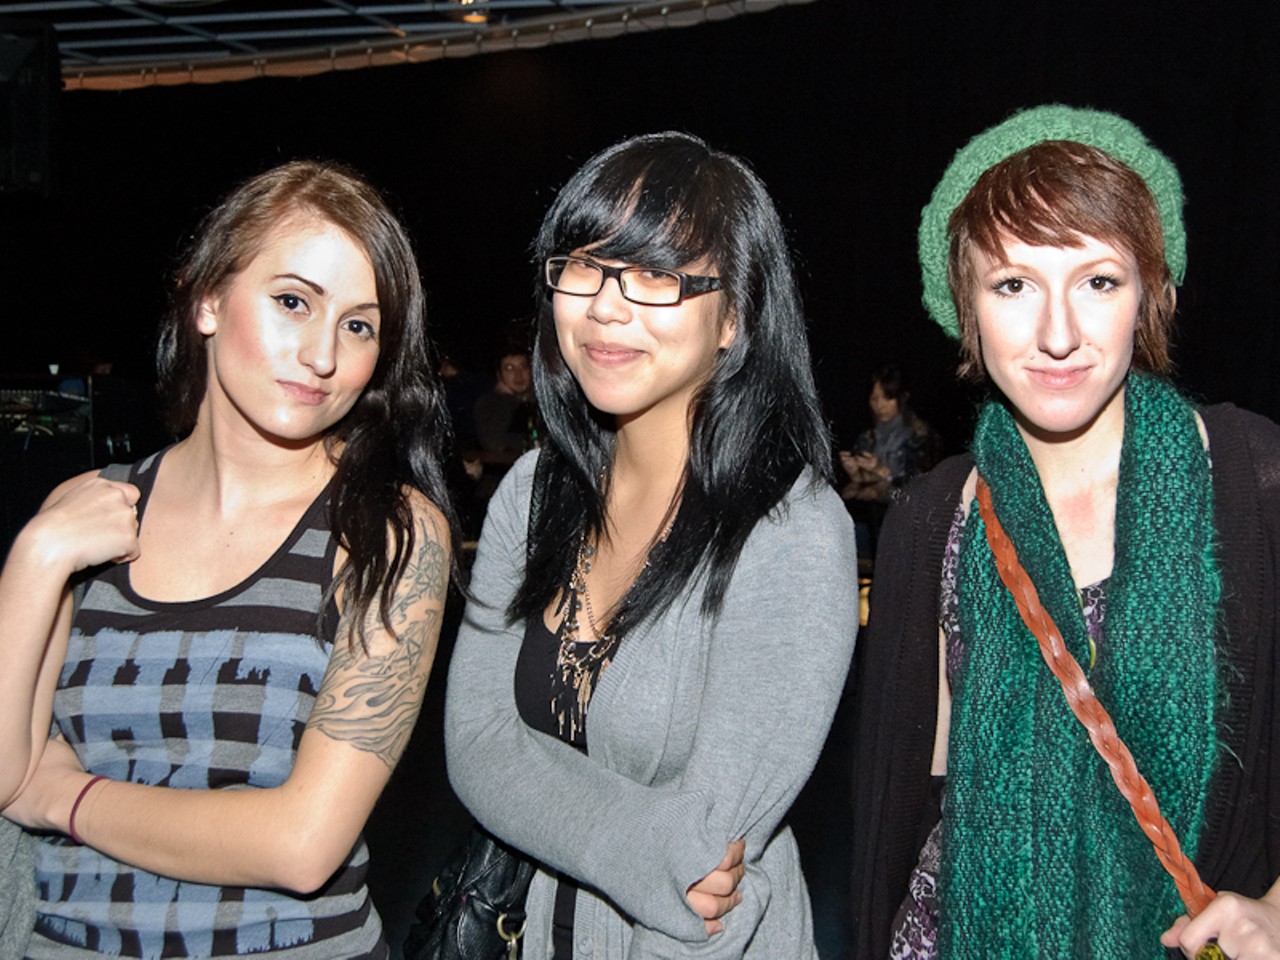 Danielle Tripoli, Julie Wood and Tabitha McCluskie came up from Carbondale, Illinois for their first Japandroids show.